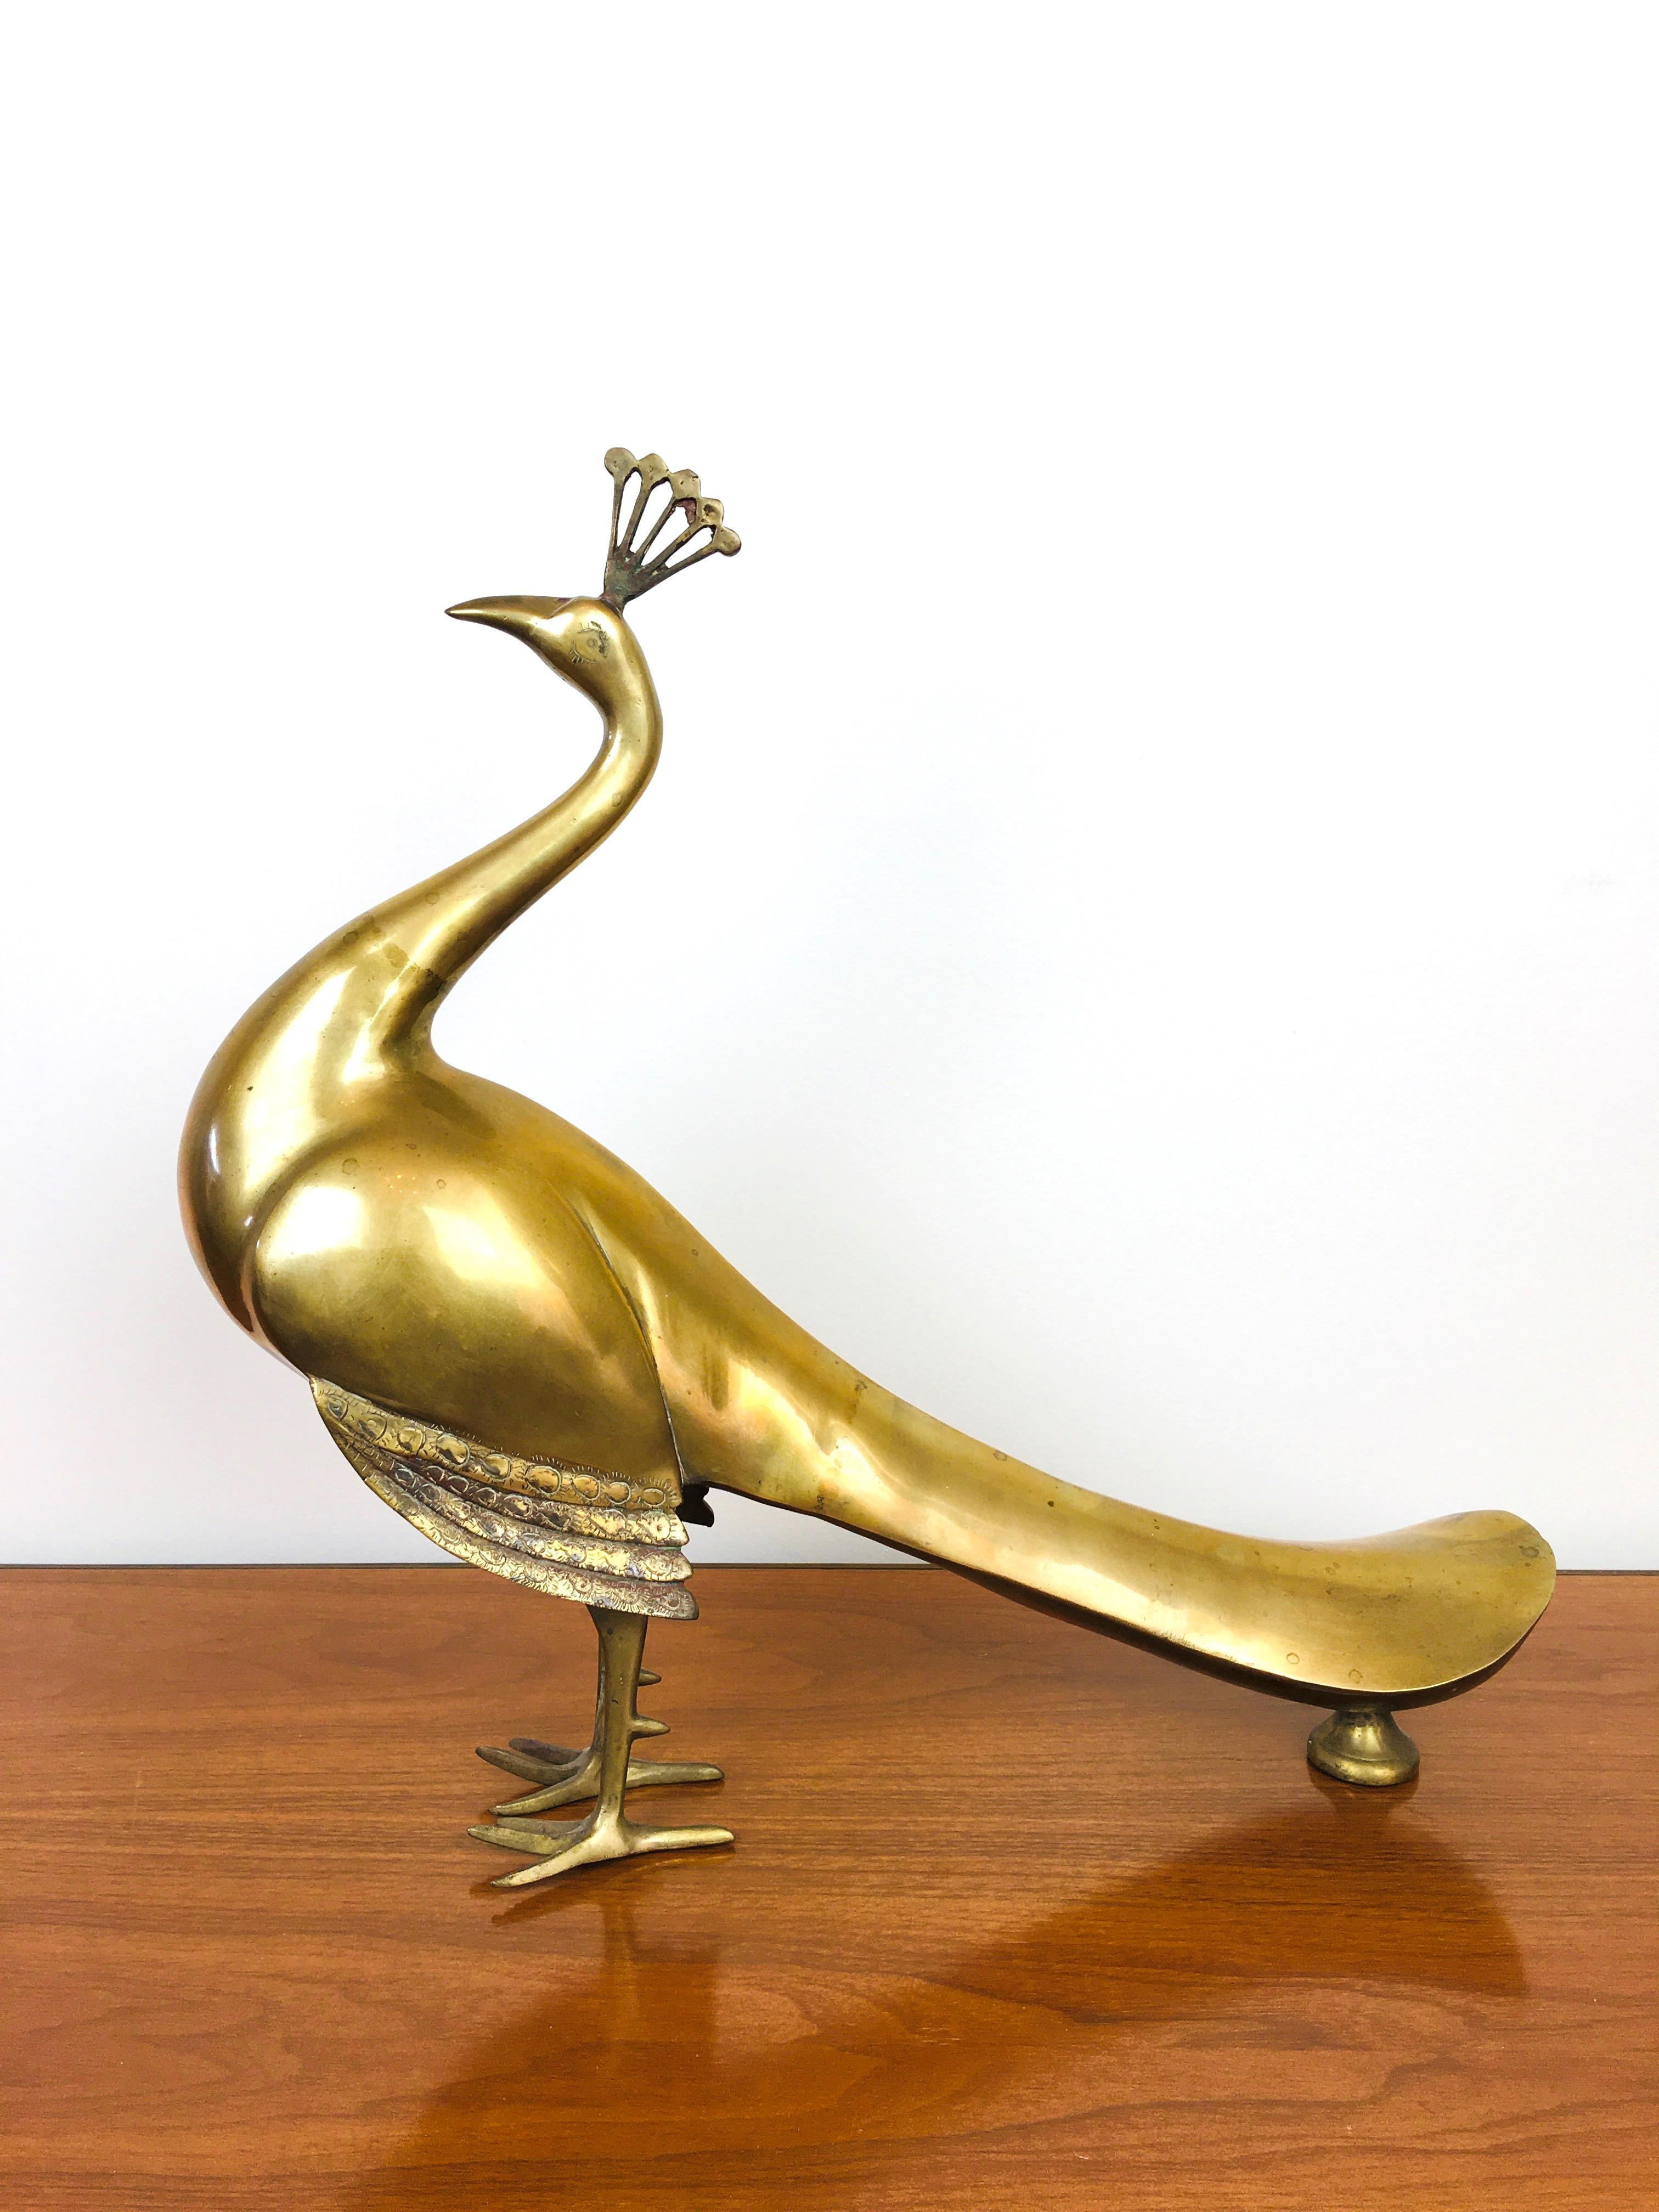 Vintage Hollywood Regency Brass Peacock Statue.
Large size, made of brass.
Very good condition, light surface wear.